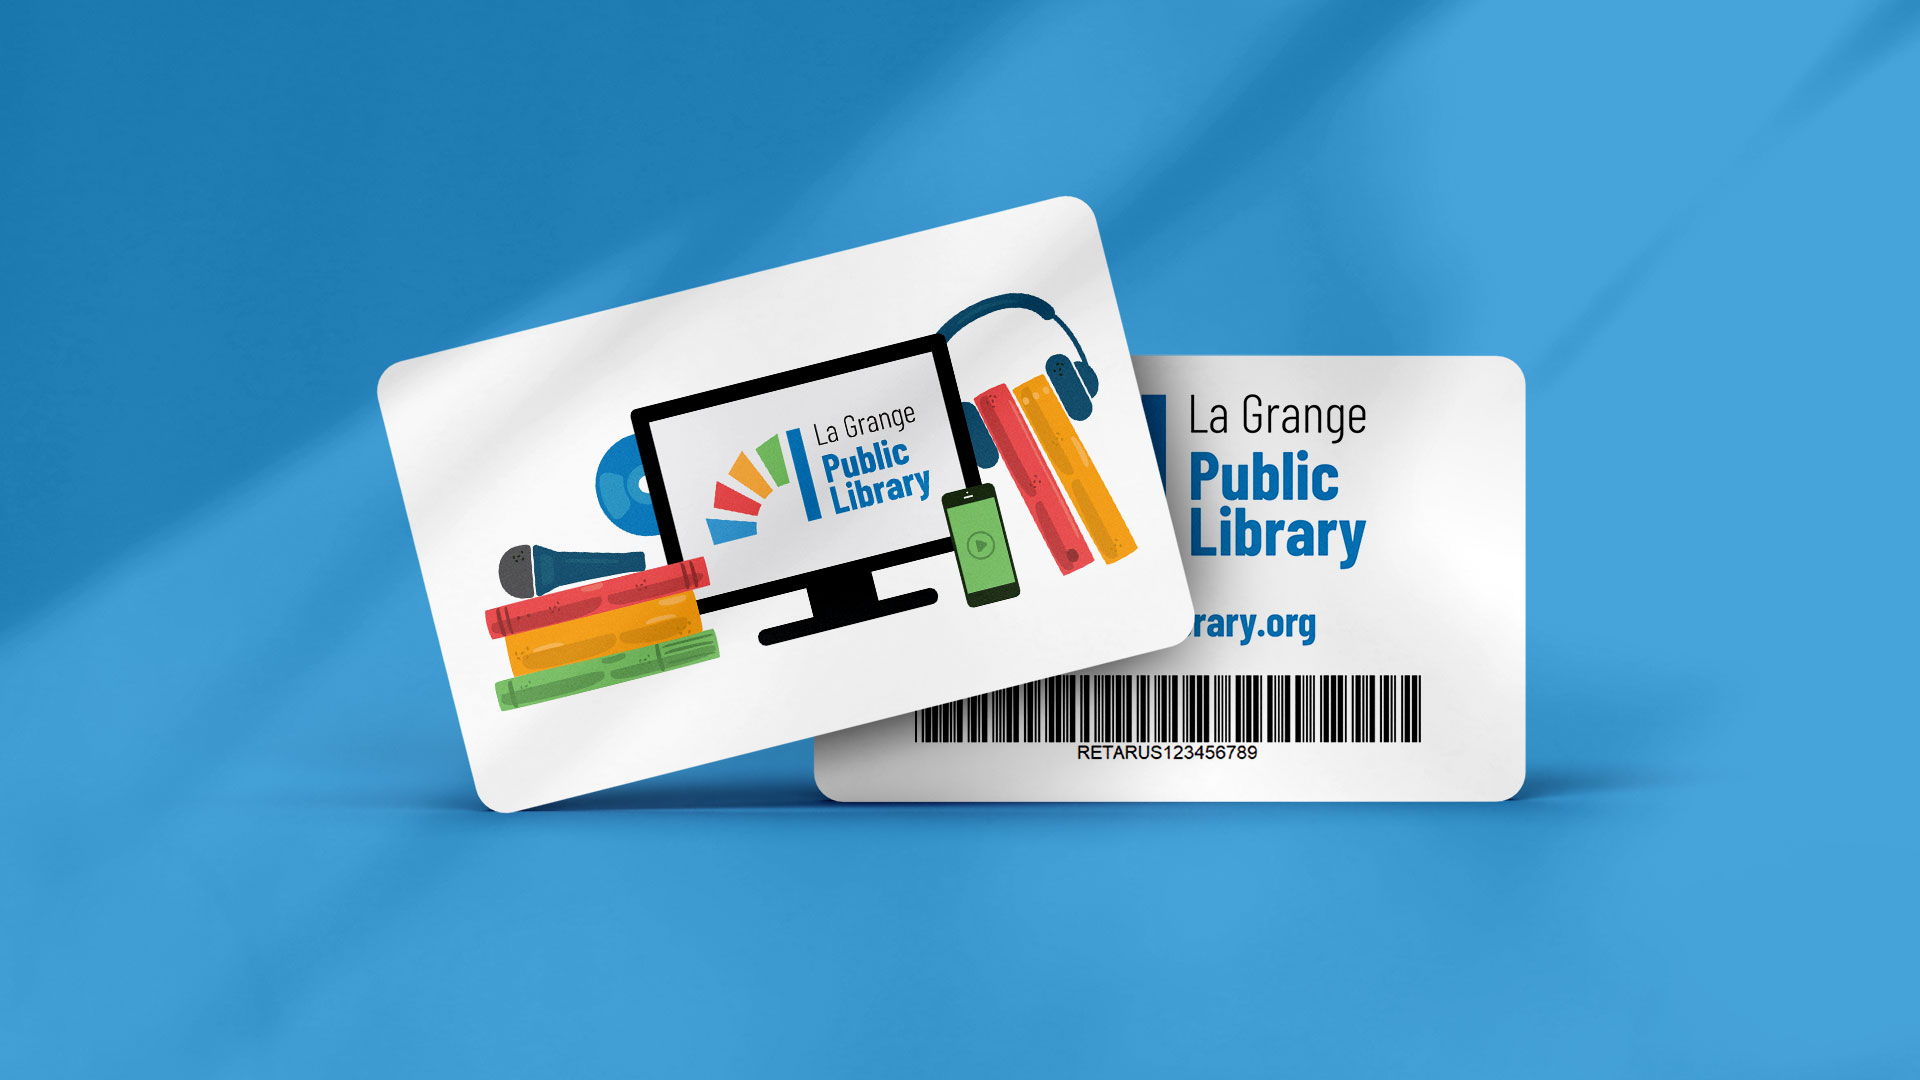 Featured image for “La Grange Library”